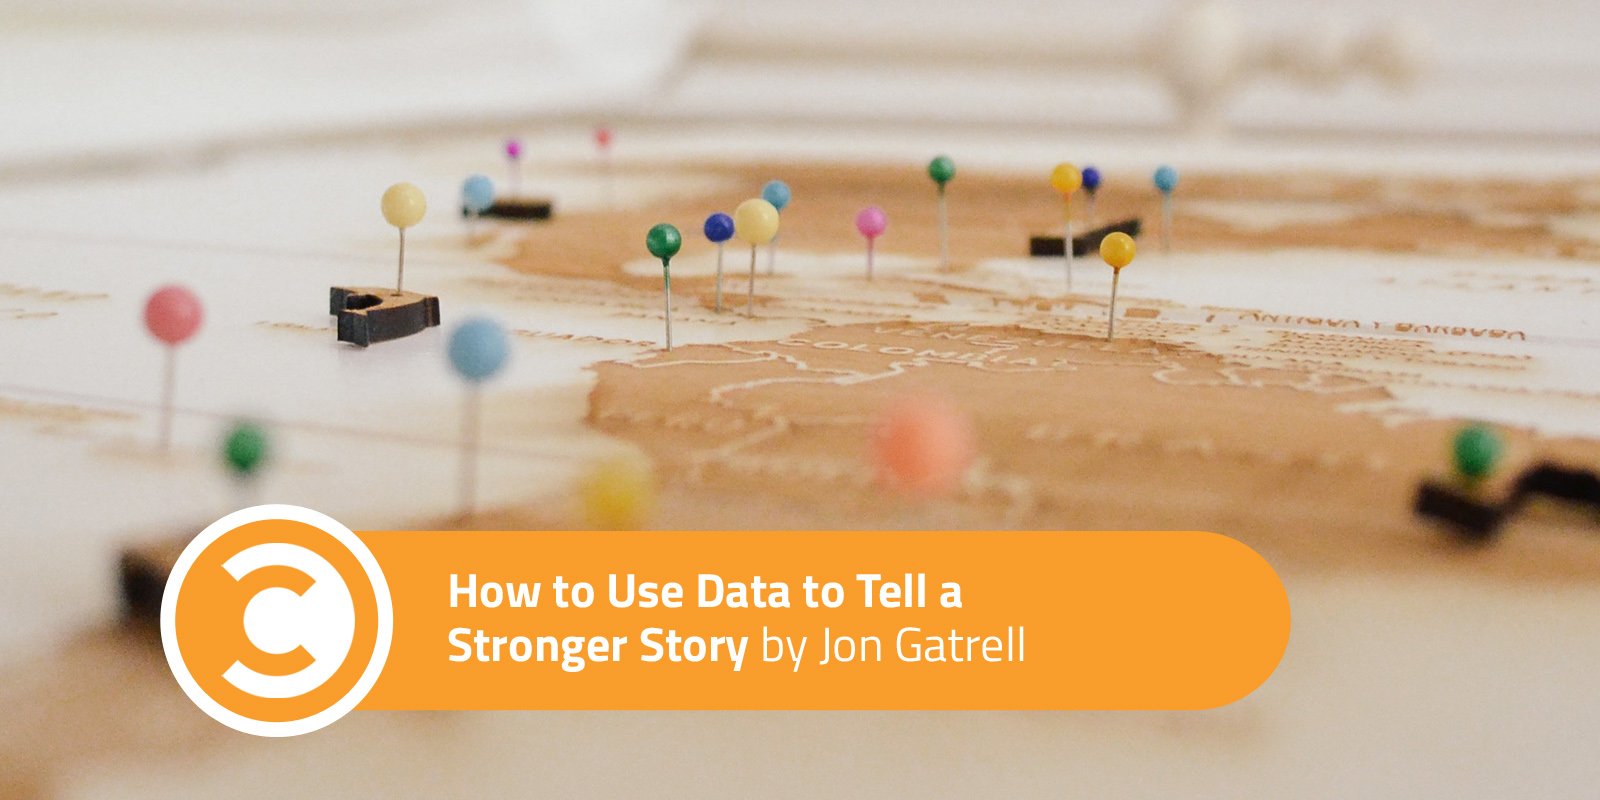 How to Use Data to Tell a Stronger Story